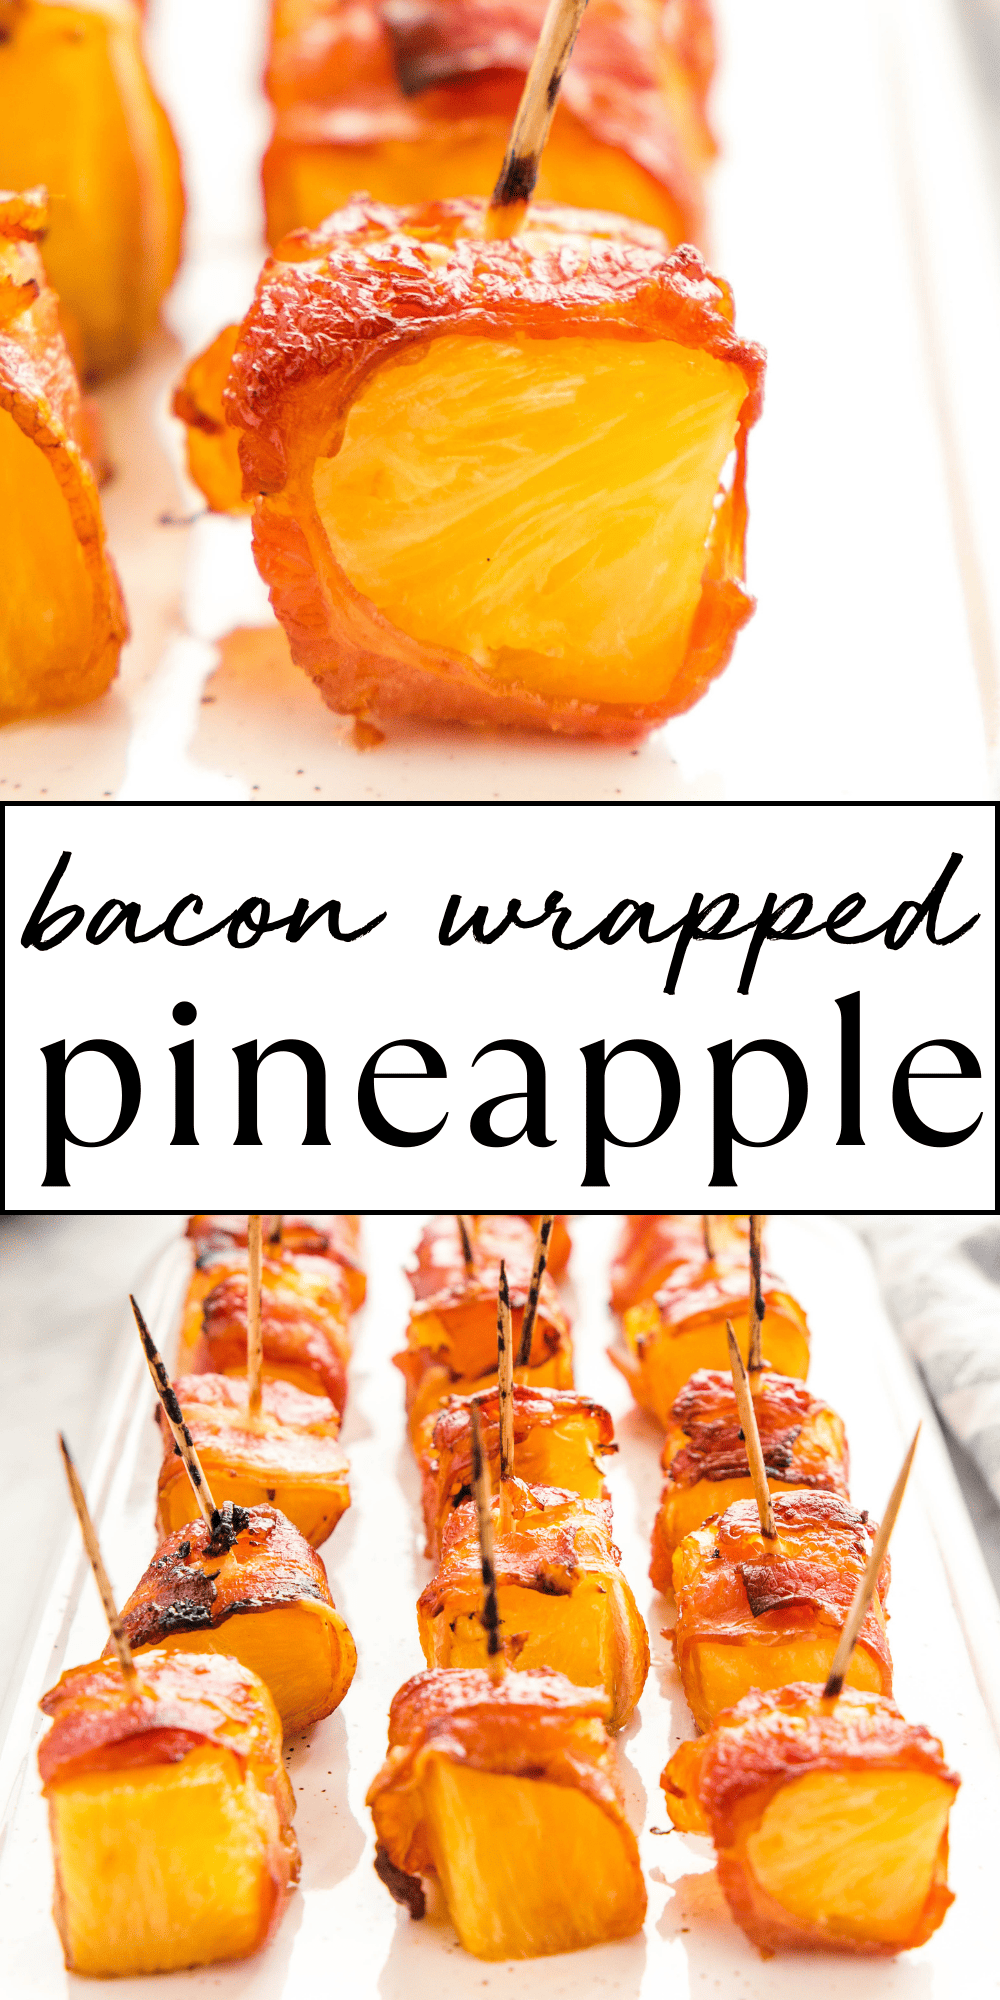 This Bacon Wrapped Pineapple recipe is the BEST easy appetizer recipe that's gluten-free, low-carb, and easy to make in minutes! Perfect for parties and made with only 4 simple ingredients! Recipe from thebusybaker.ca! #appetizer #baconwrapped #bacon #baconwrappedpineapple #glutenfree #lowcarb #keto #fruit #sweetandsalty #easyappetizer #partyfood via @busybakerblog